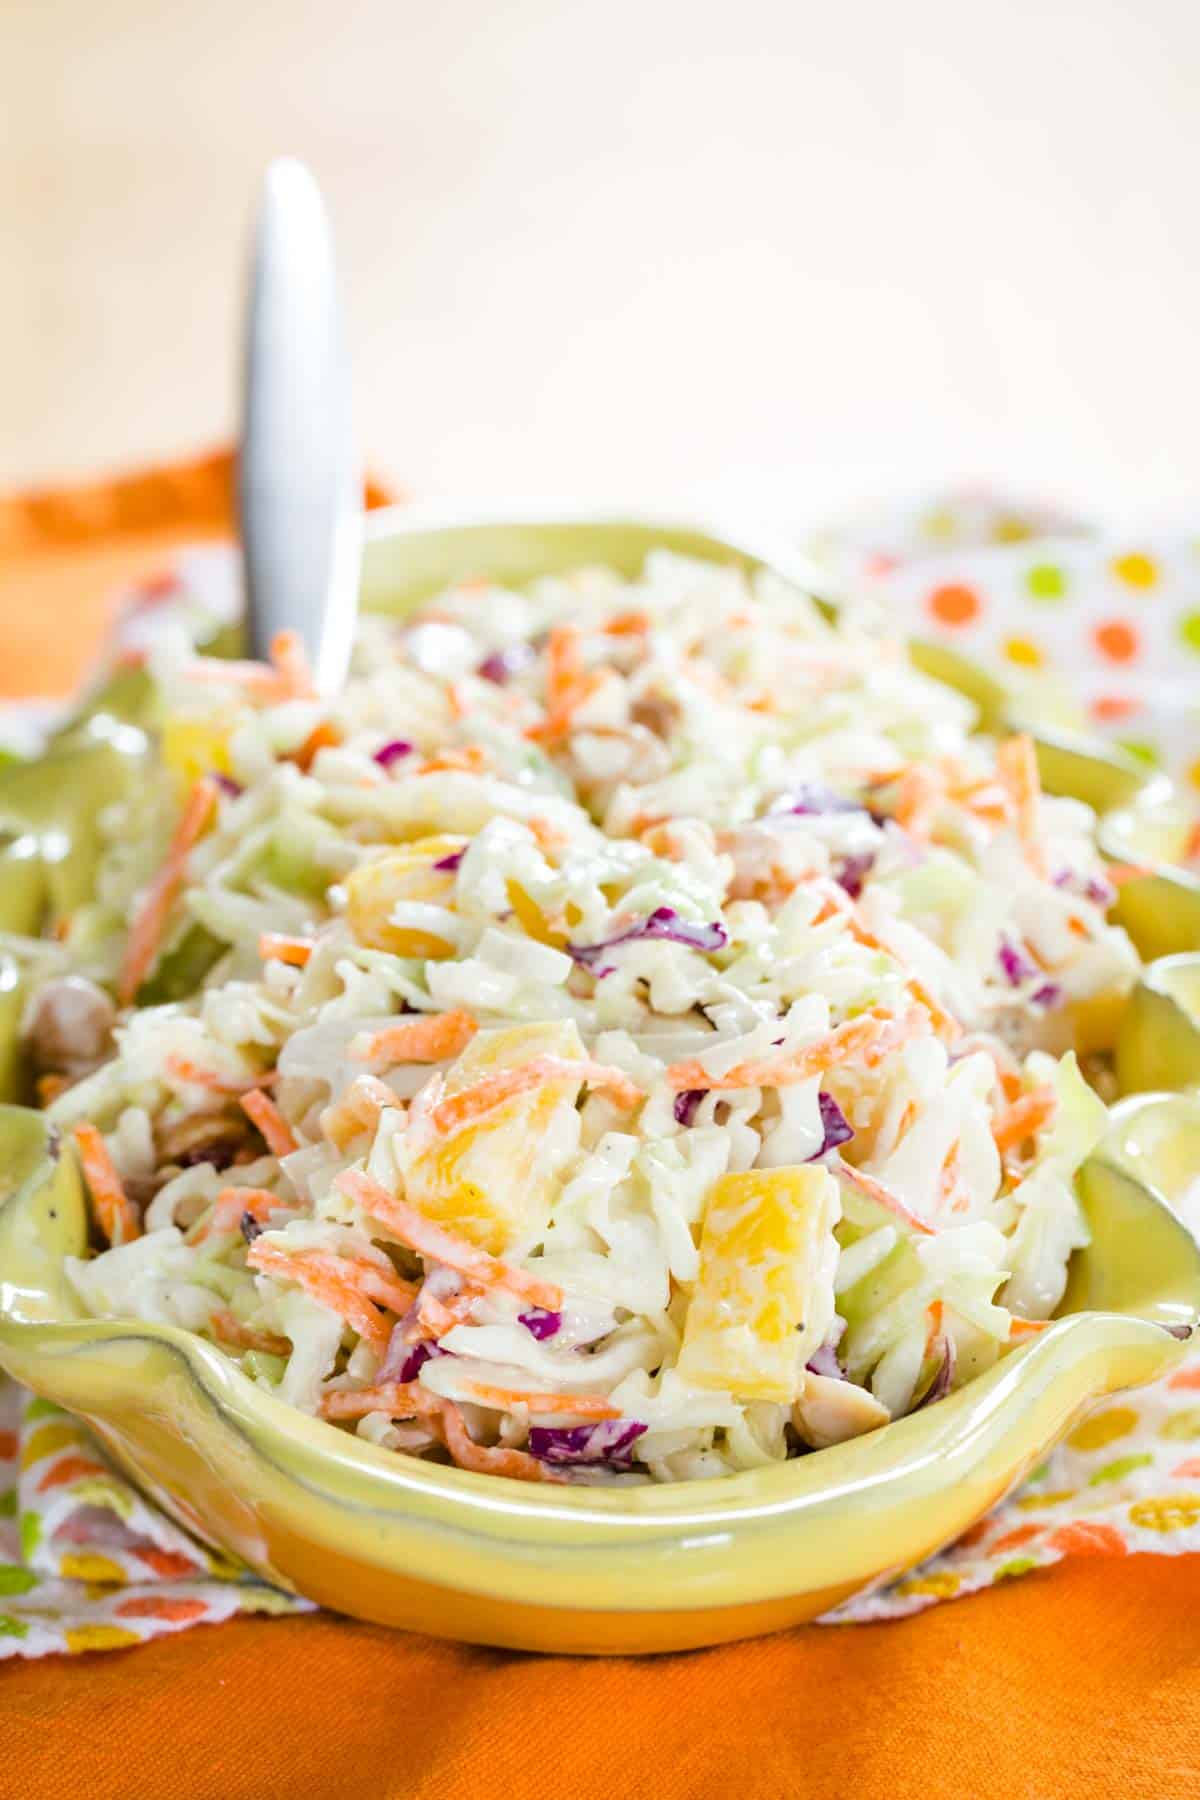 Healthy Pineapple Coleslaw in a yellow serving dish